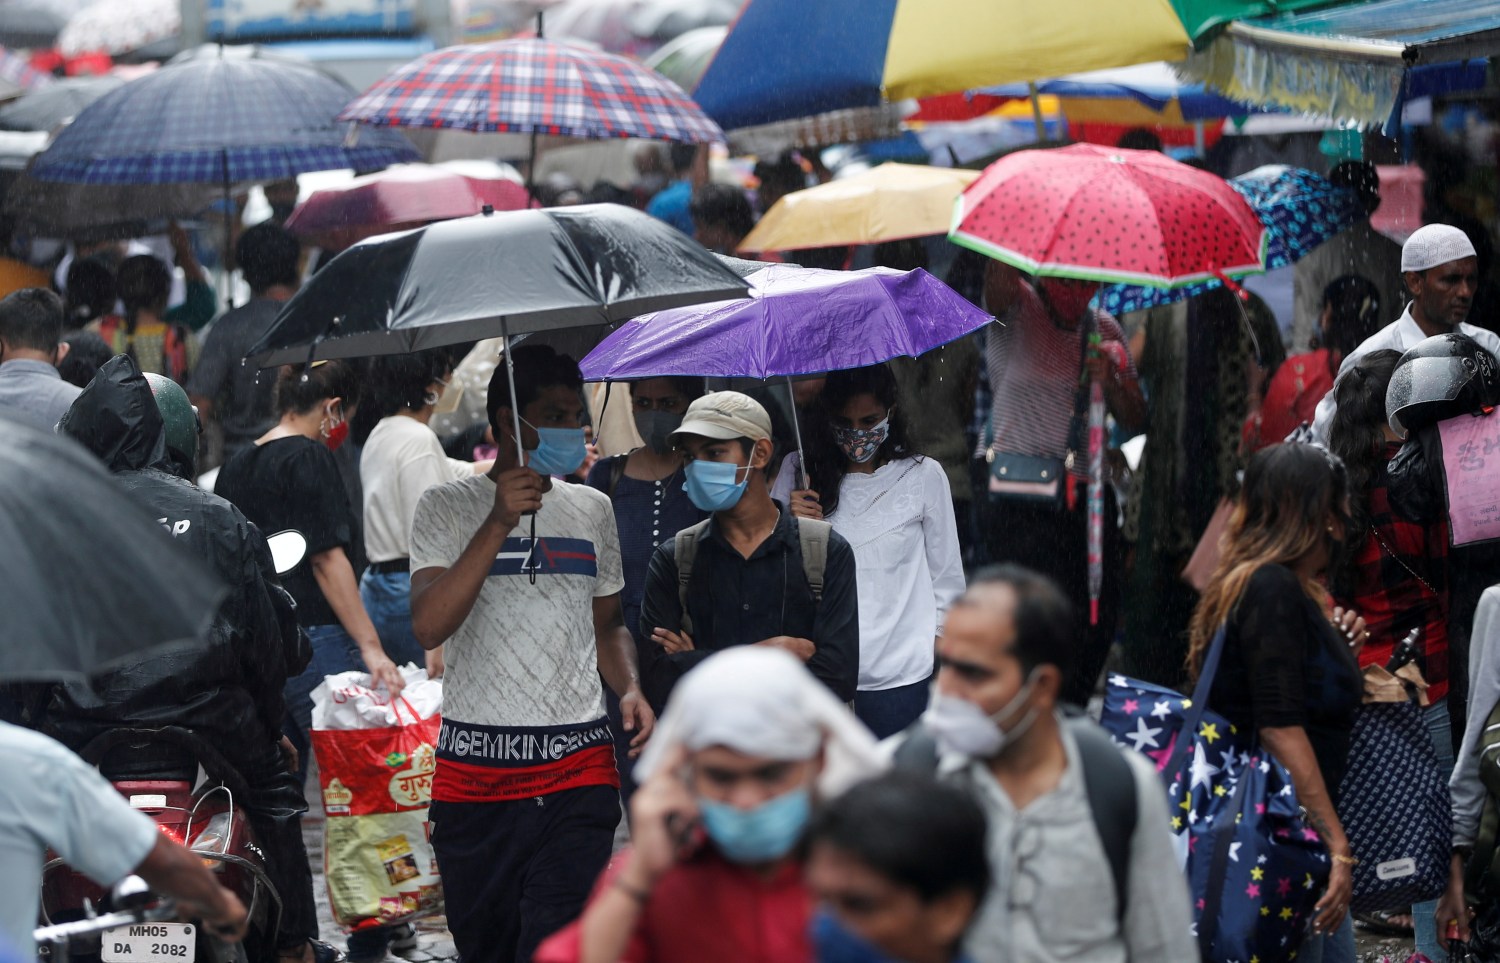 FILE PHOTO: People walk through a crowded market on a rainy day amidst the spread of the coronavirus disease (COVID-19) in Mumbai, India, July 14, 2021. REUTERS/Francis Mascarenhas/File Photo